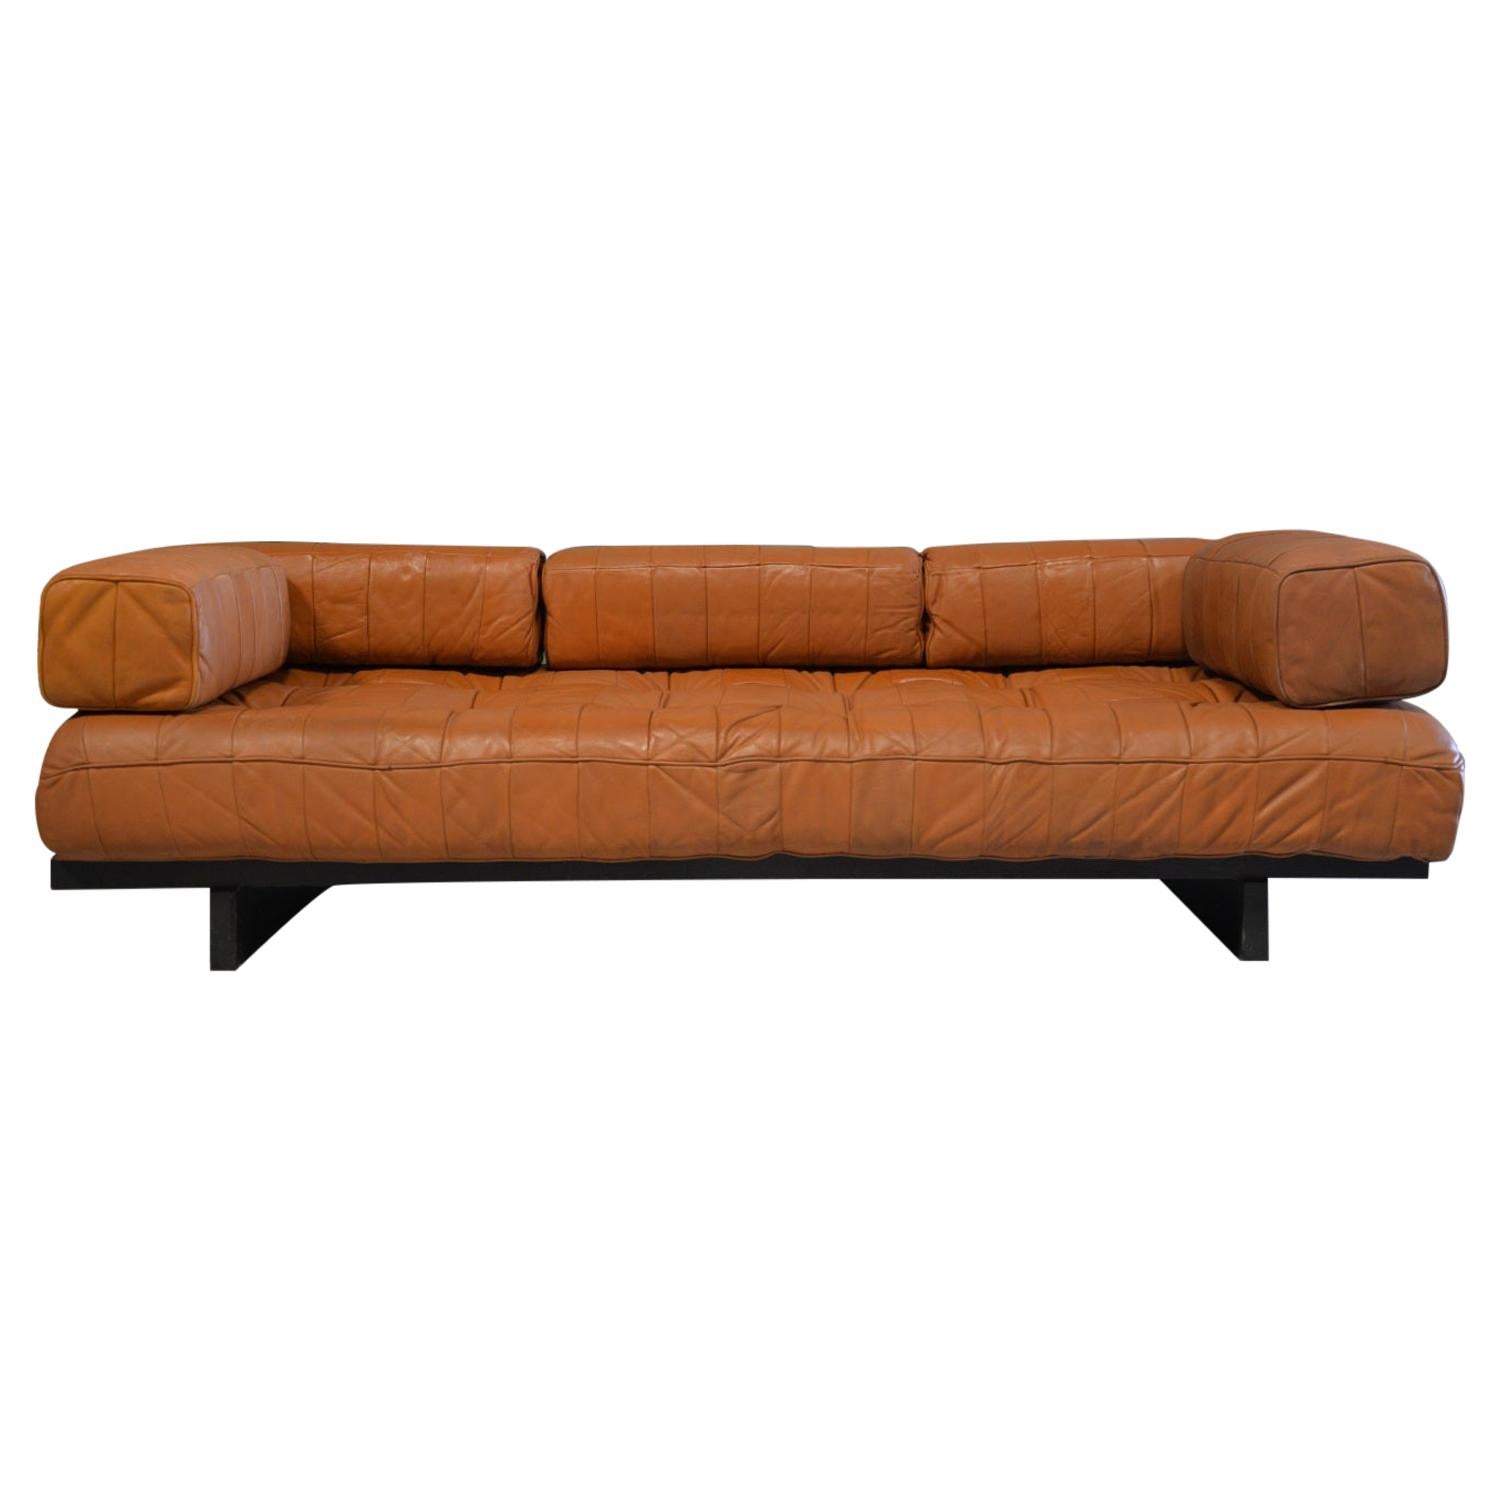 Vintage De Sede DS 80 Patchwork Leather Daybed, Switzerland, 1960s For Sale